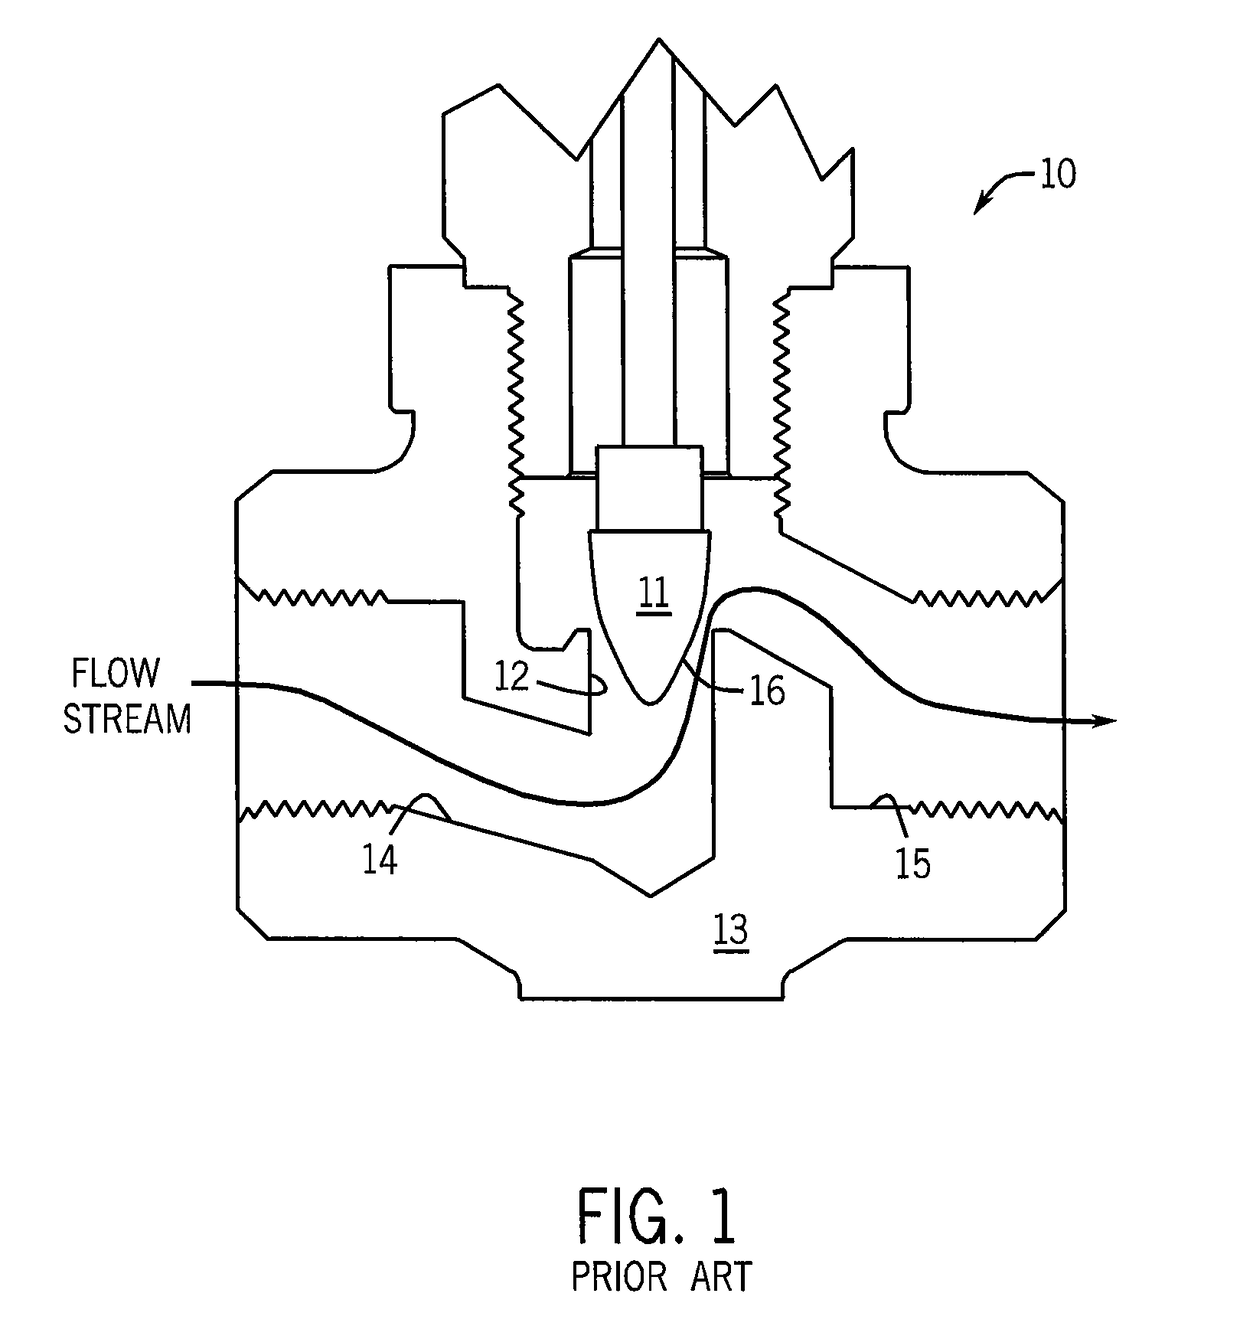 Aseptic flow control valve with outside diameter valve closure